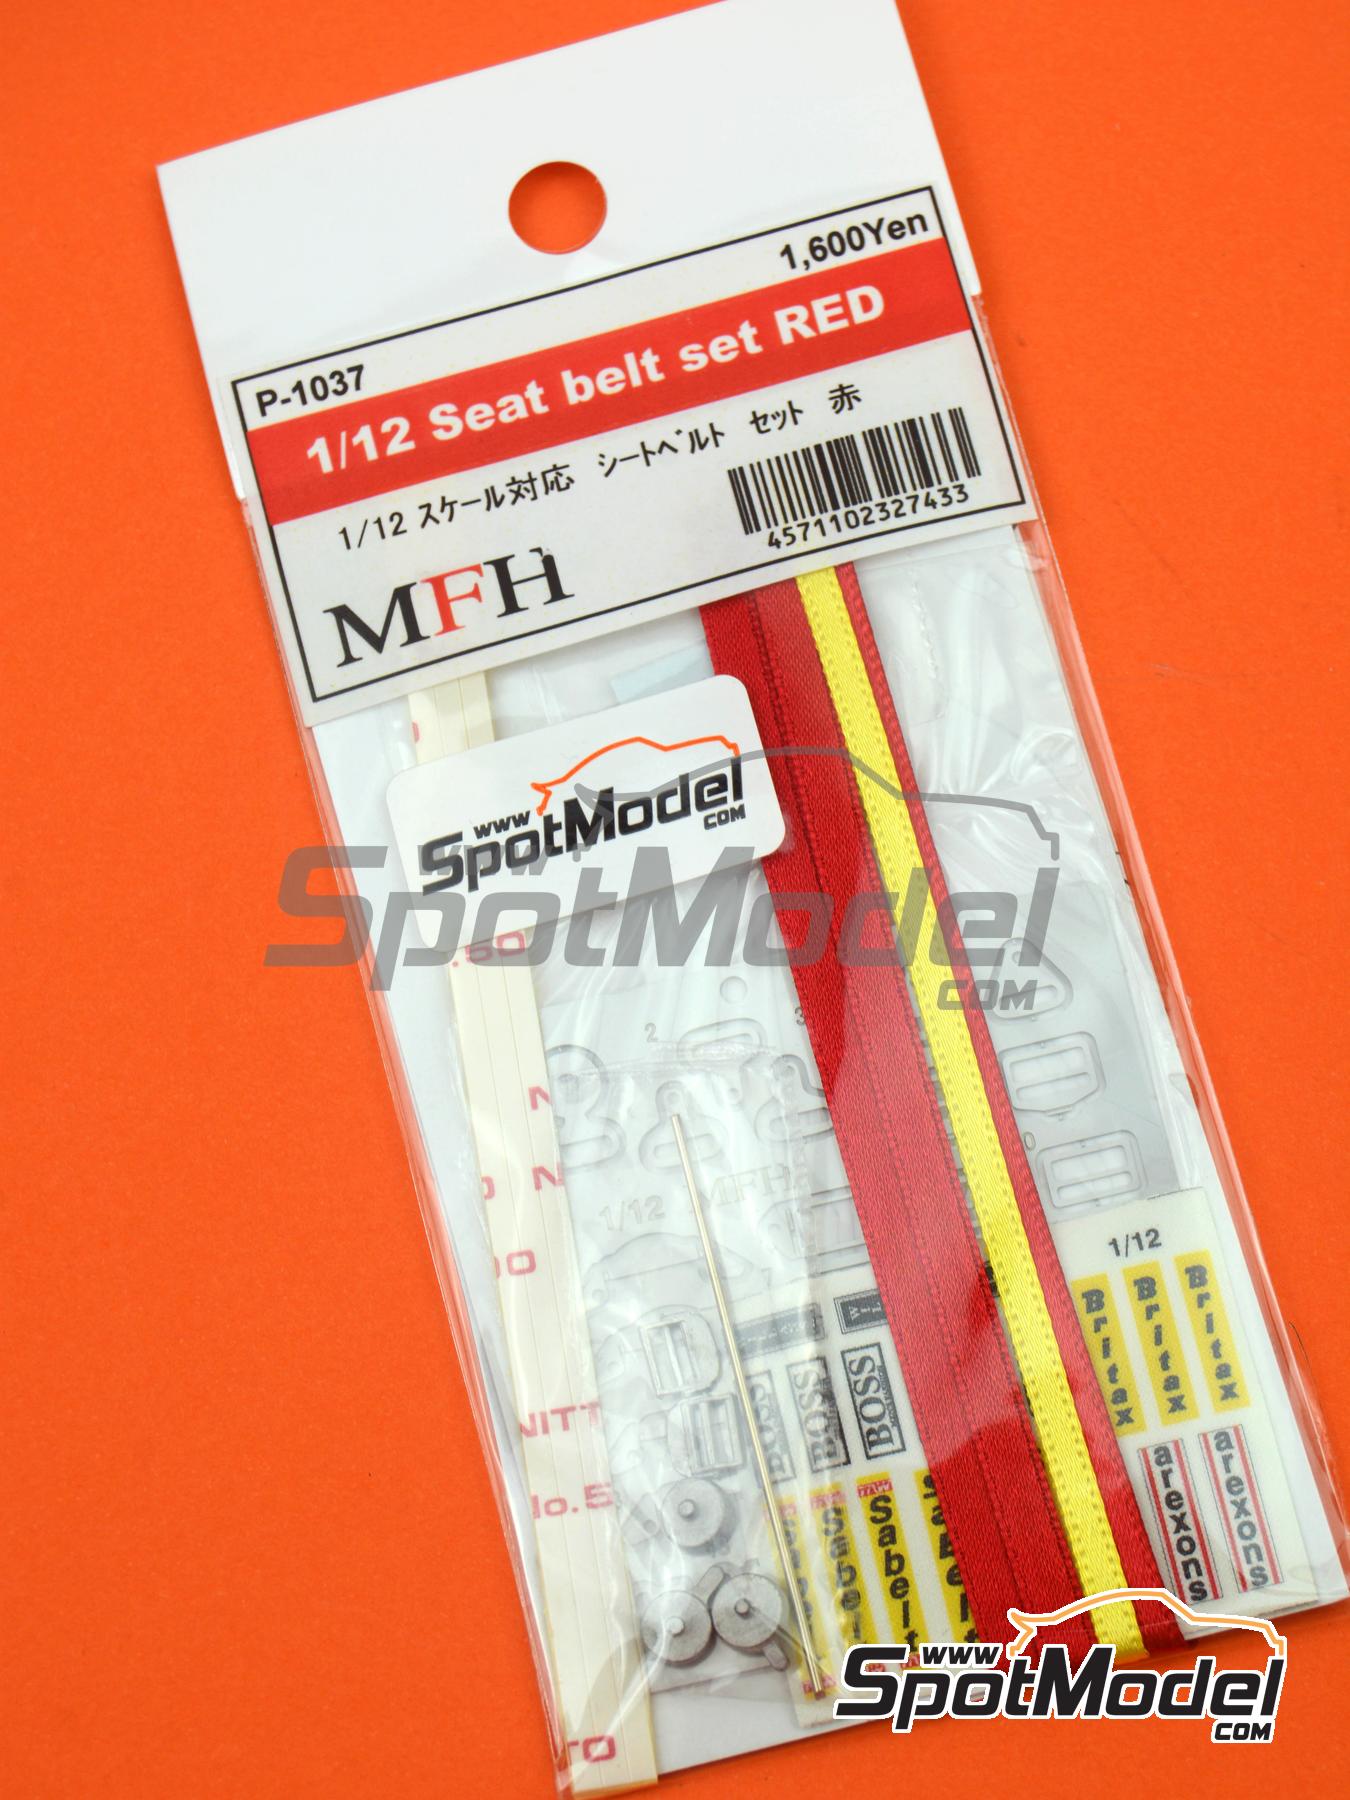 Model Factory Hiro P1037: Seatbelts 1/12 scale Seat belt set color Red  for F1 Sparco, Arexons, Britax, Boss, Willans, Sabelt (ref. MFH-P1037)  SpotModel